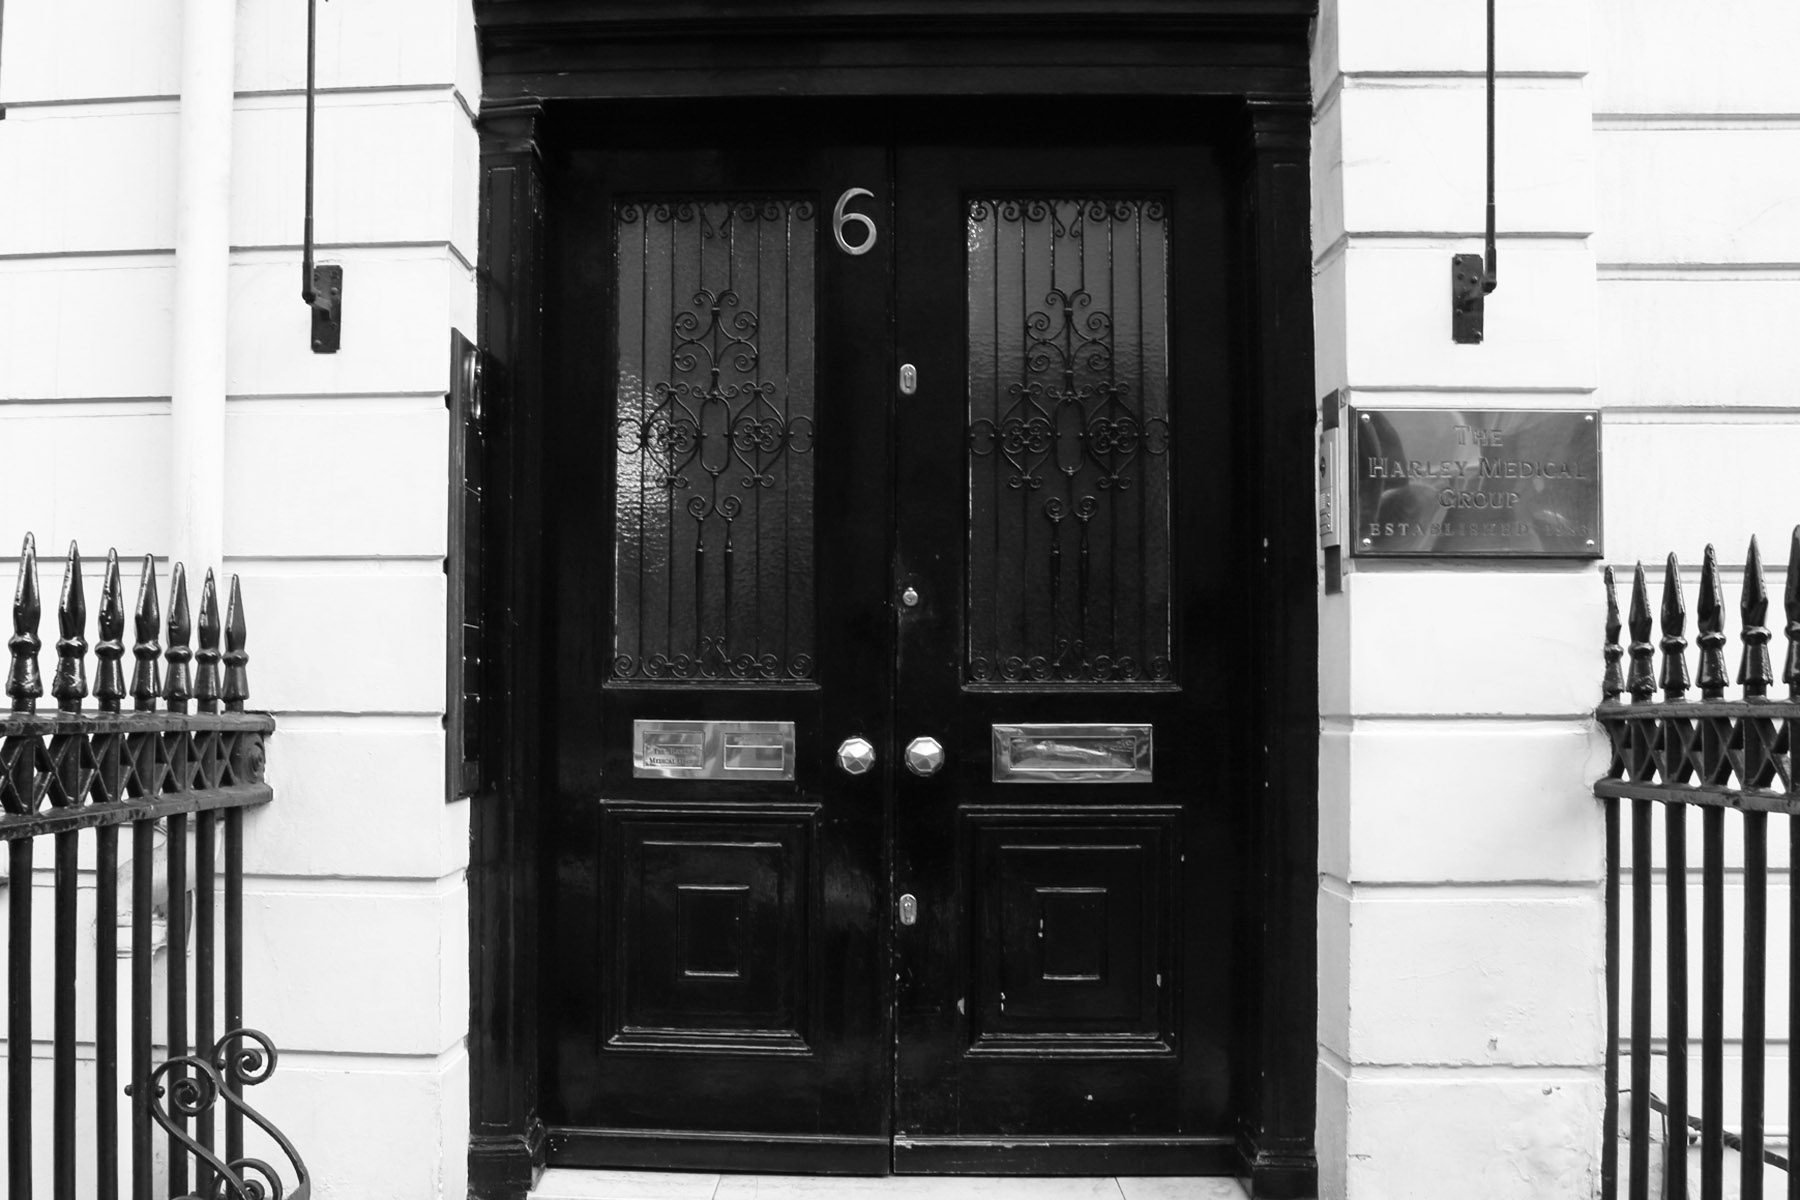 the double doors are painted black and white